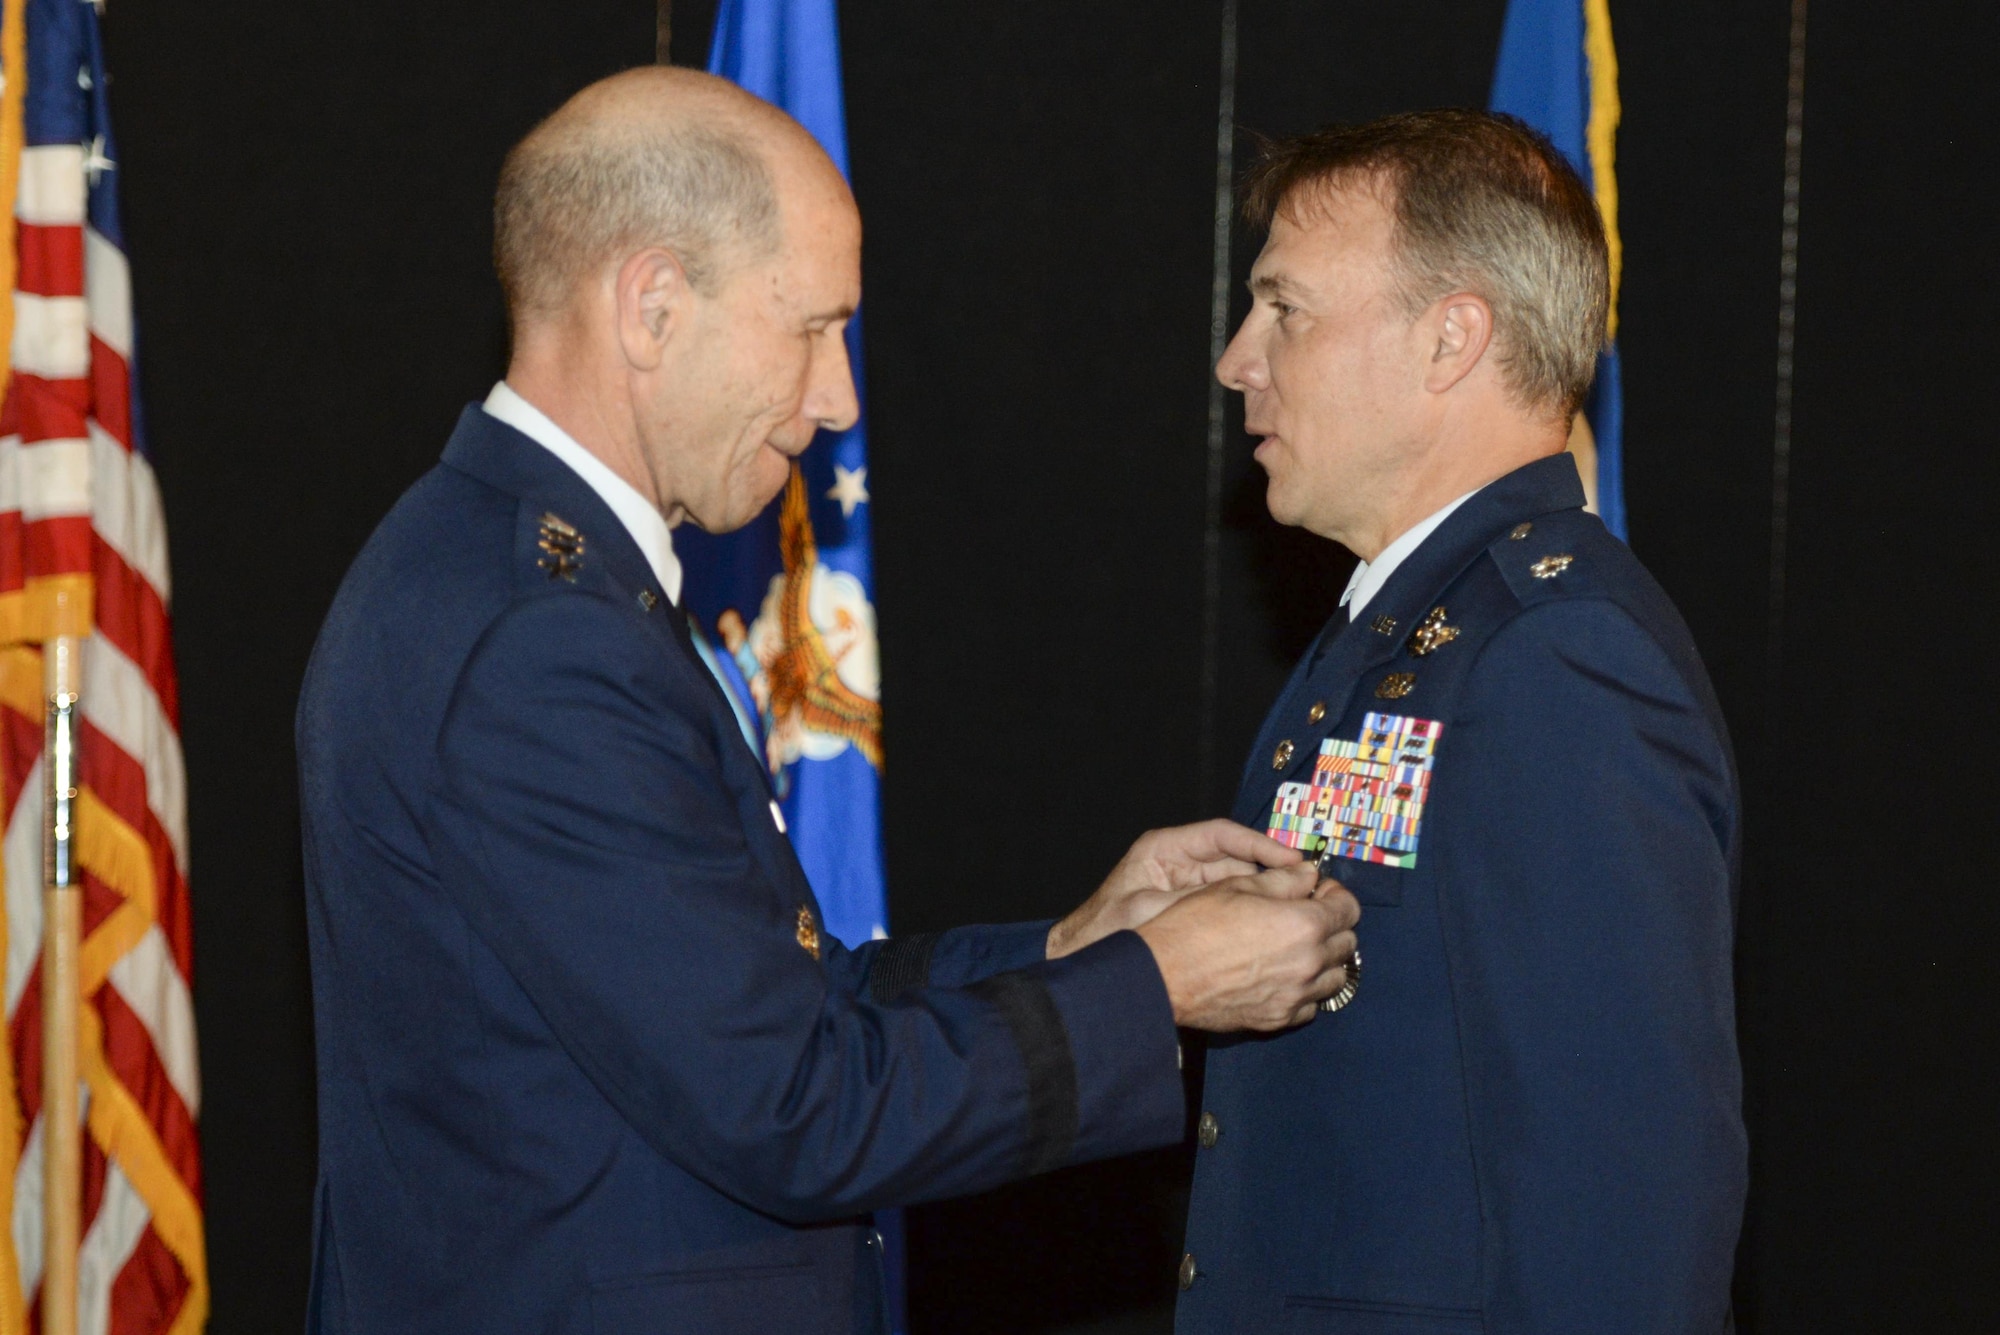 Gen. Mike Holmes, commander, Air Combat Command, presents retired Air Force Lt. Col. Gregory Thornton with the Silver Star medal during a ceremony at the National Museum of the United States Air Force in Dayton, Ohio, June 30, 2017. Thornton received the Silver Star for his actions on April 6, 2003 while supporting ‘Advance 33,’ the call sign for a ground forward air controller attached to Task Force 2nd Battalion, 69th Armor, during combat operations in Iraq. The Silver Star is the third-highest combat decoration for gallantry in action that can be awarded to a member of the United States Armed Forces. (U.S. Air Force photo by Wesley Farnsworth) 